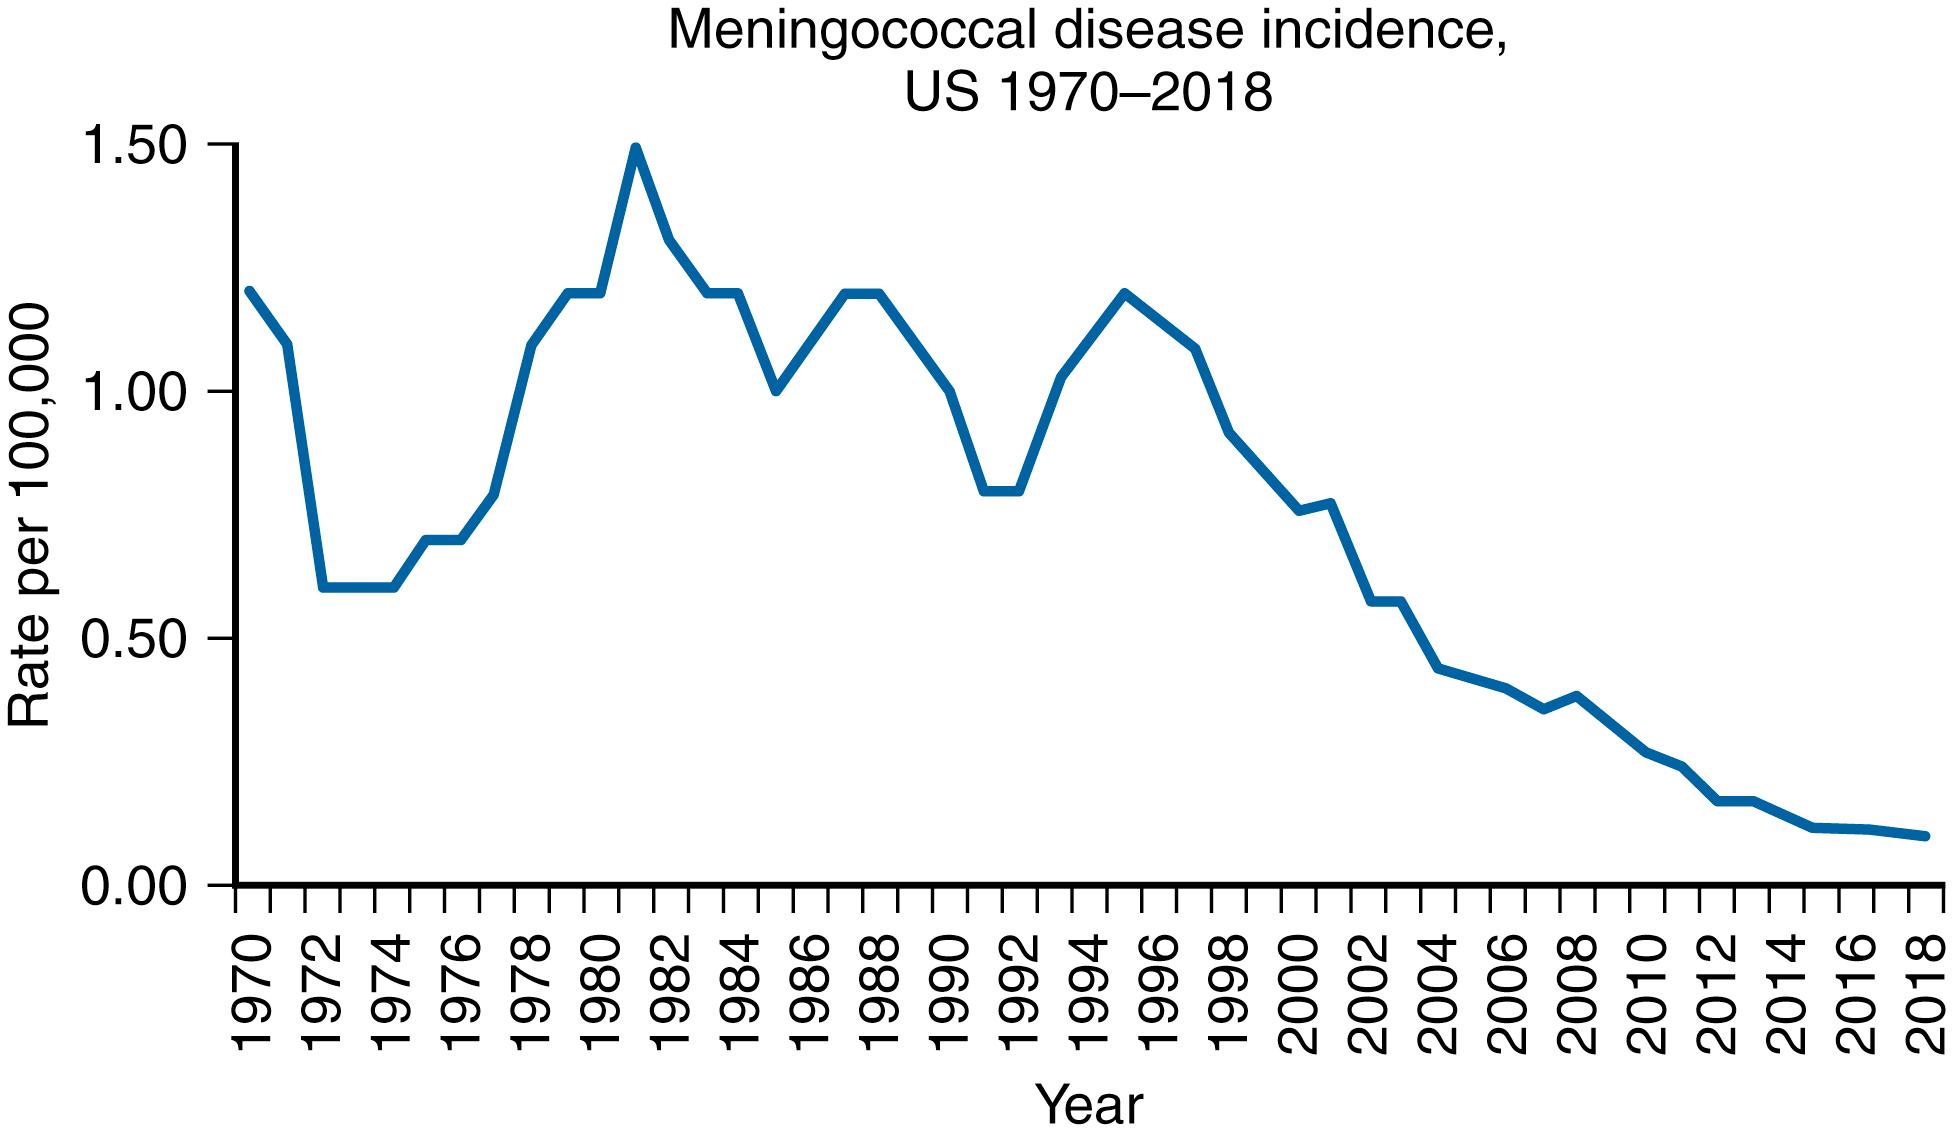 Figure 40.2, Incidence per 100,000 persons of meningococcal disease in the US, 1970–2018.